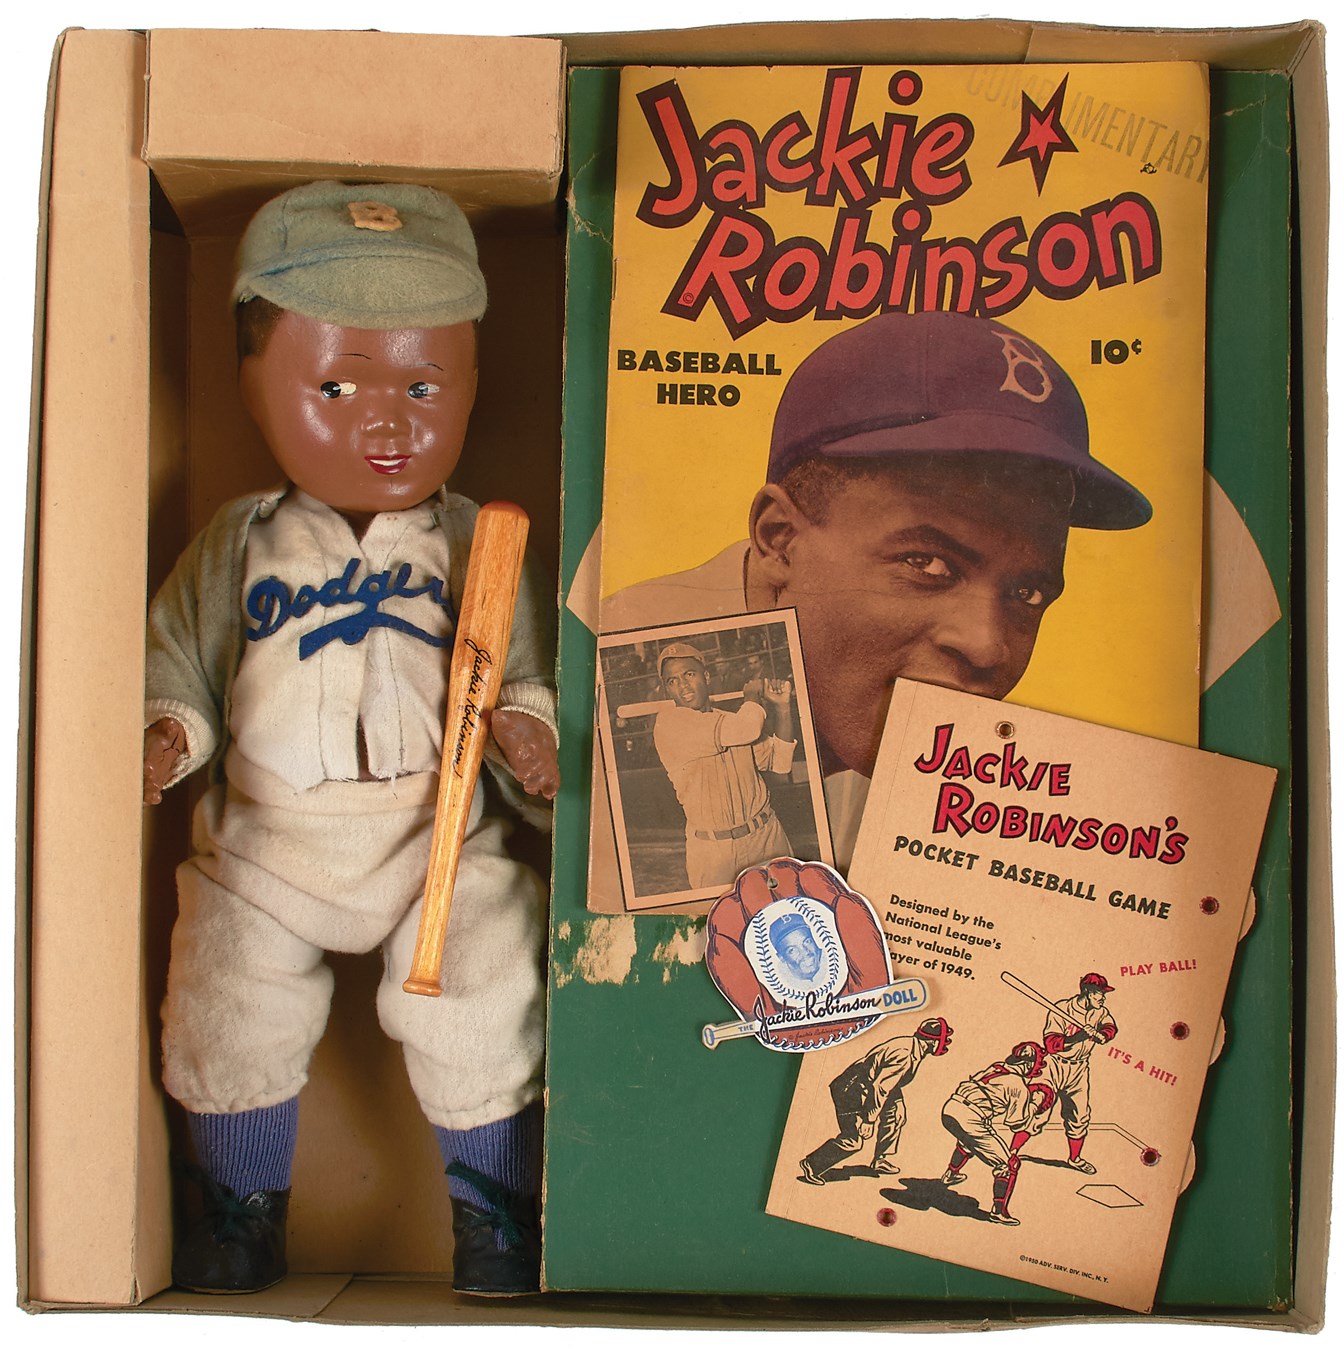 - Jackie Robinson Doll in Original Box - Rarest Version and Most Complete One We Have Seen